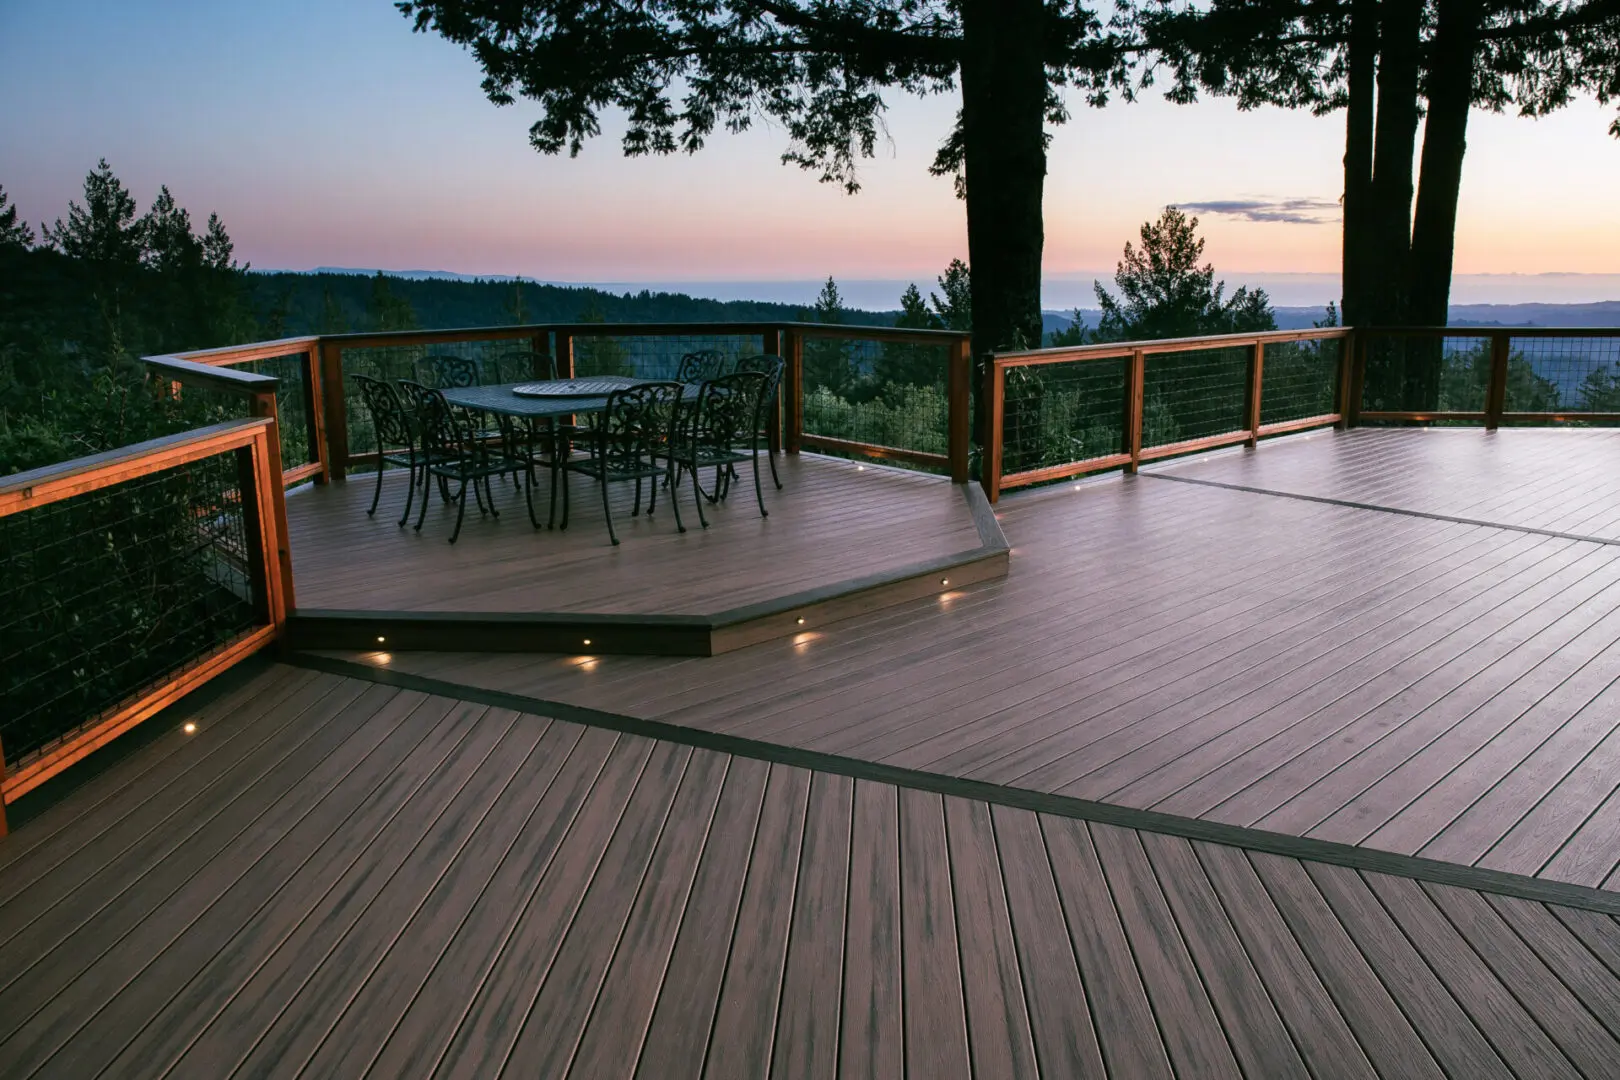 A deck with an elevated platform